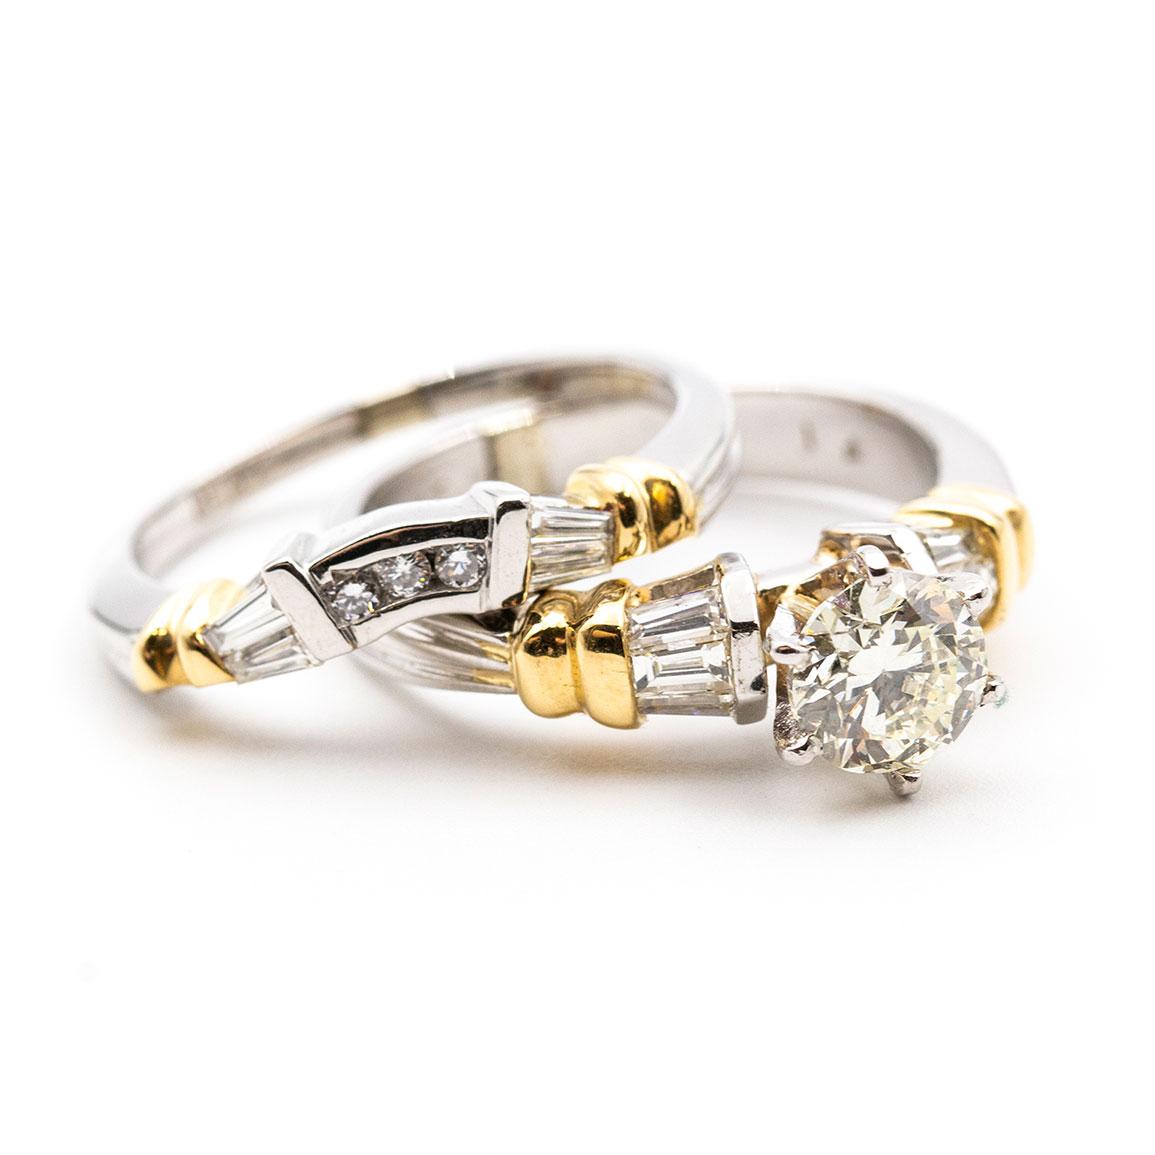 Carefully Crafted in platinum and 18 carat yellow gold is this uniquely designed vintage engagement and wedding bridal ring set flaunting a central 1.00 carat round diamond complimented by six handsome baguette cut diamonds in the band. The